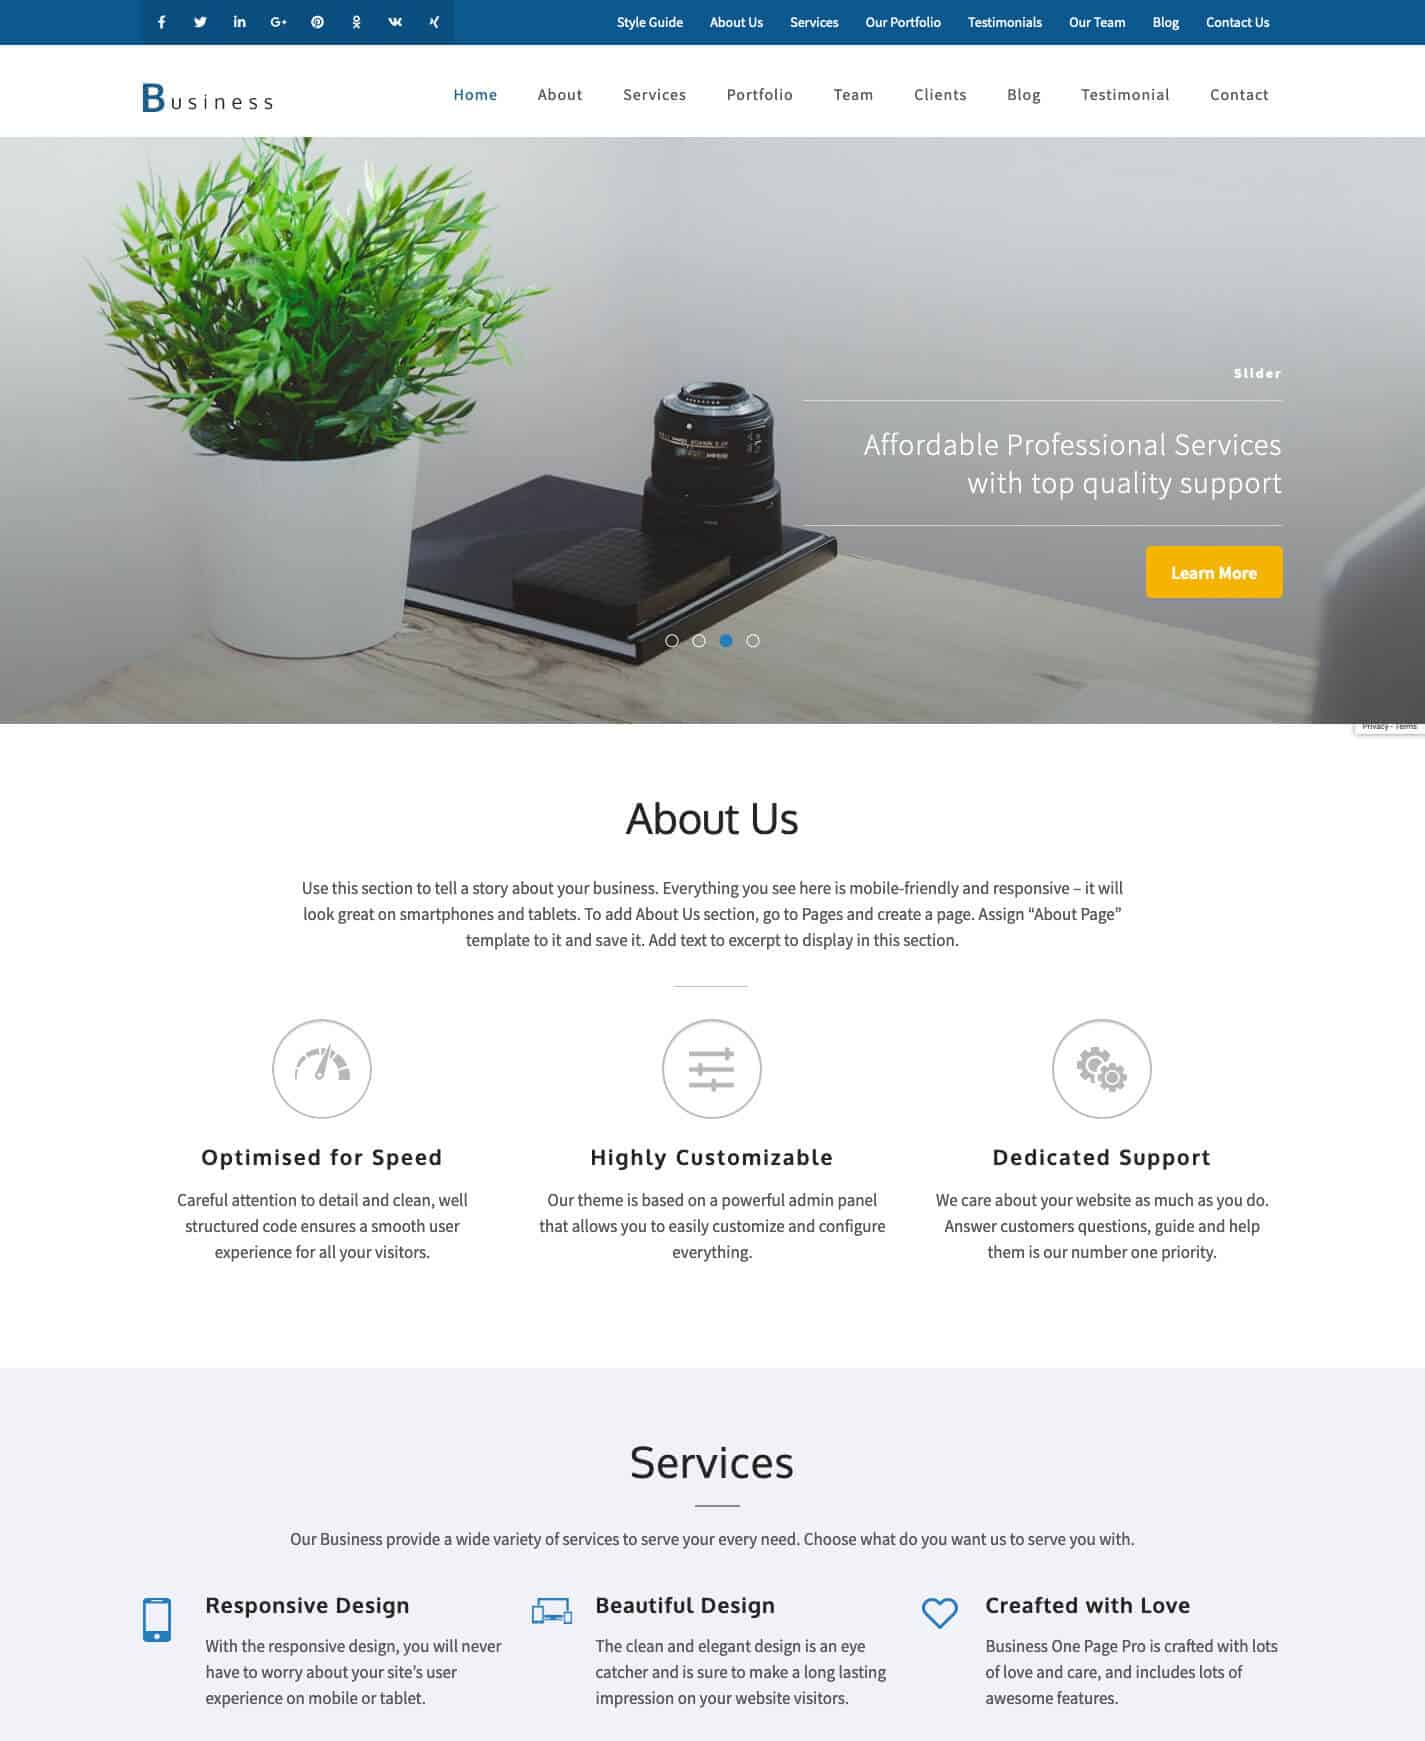 Business One Page Pro